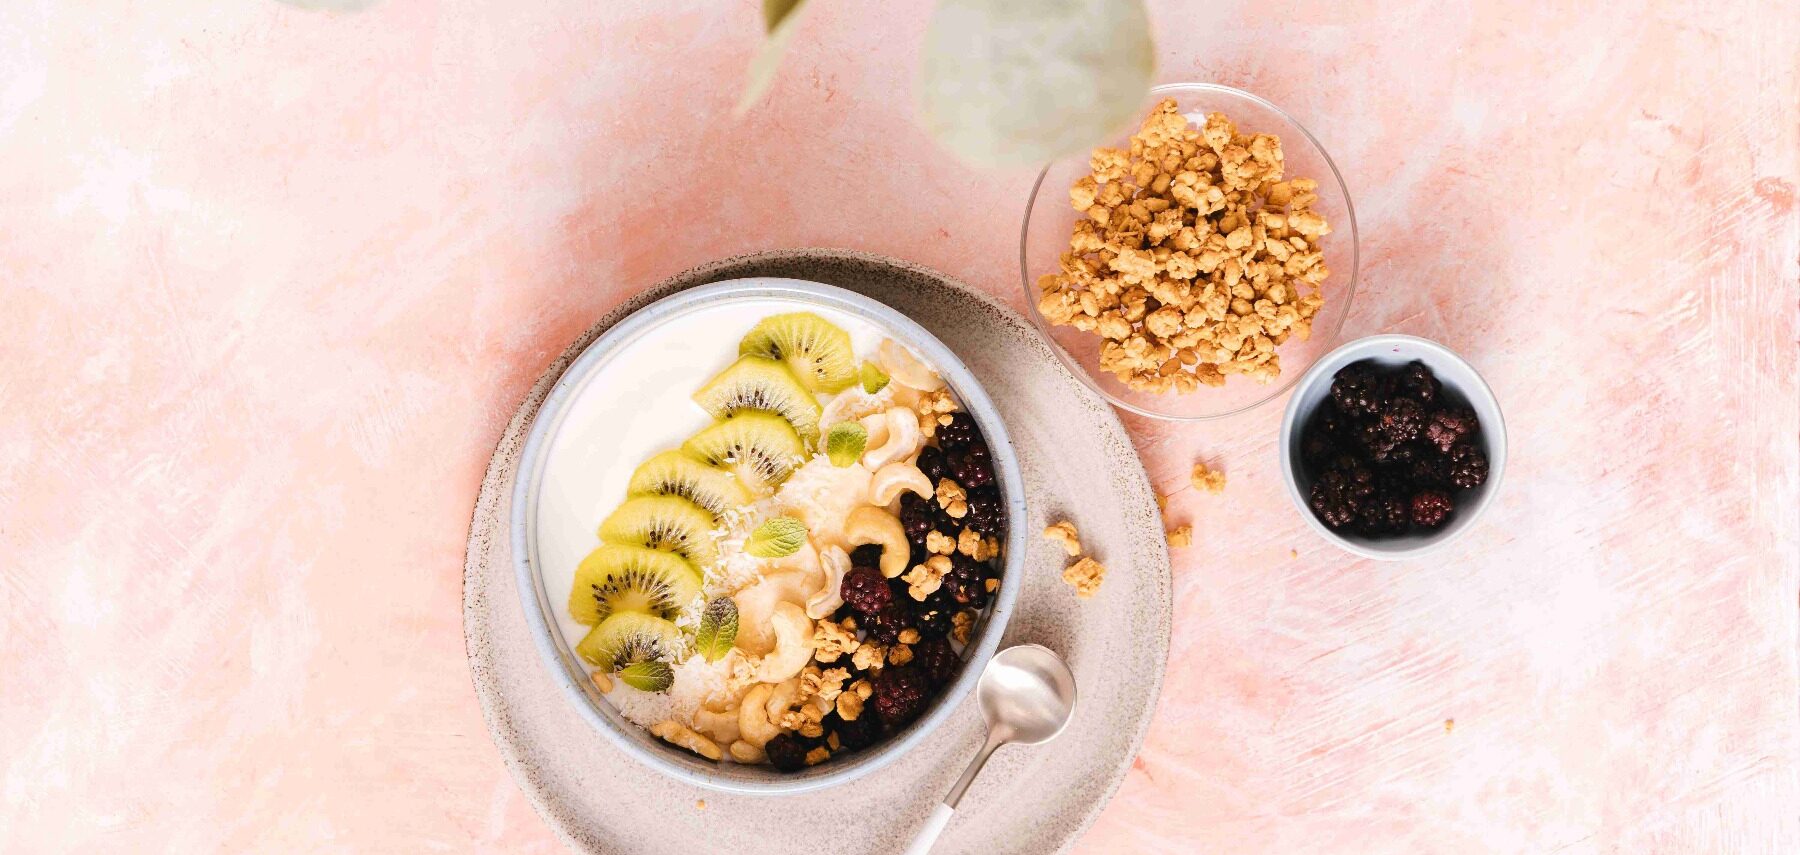 What to eat before a workout Yogurt with fruit and granola